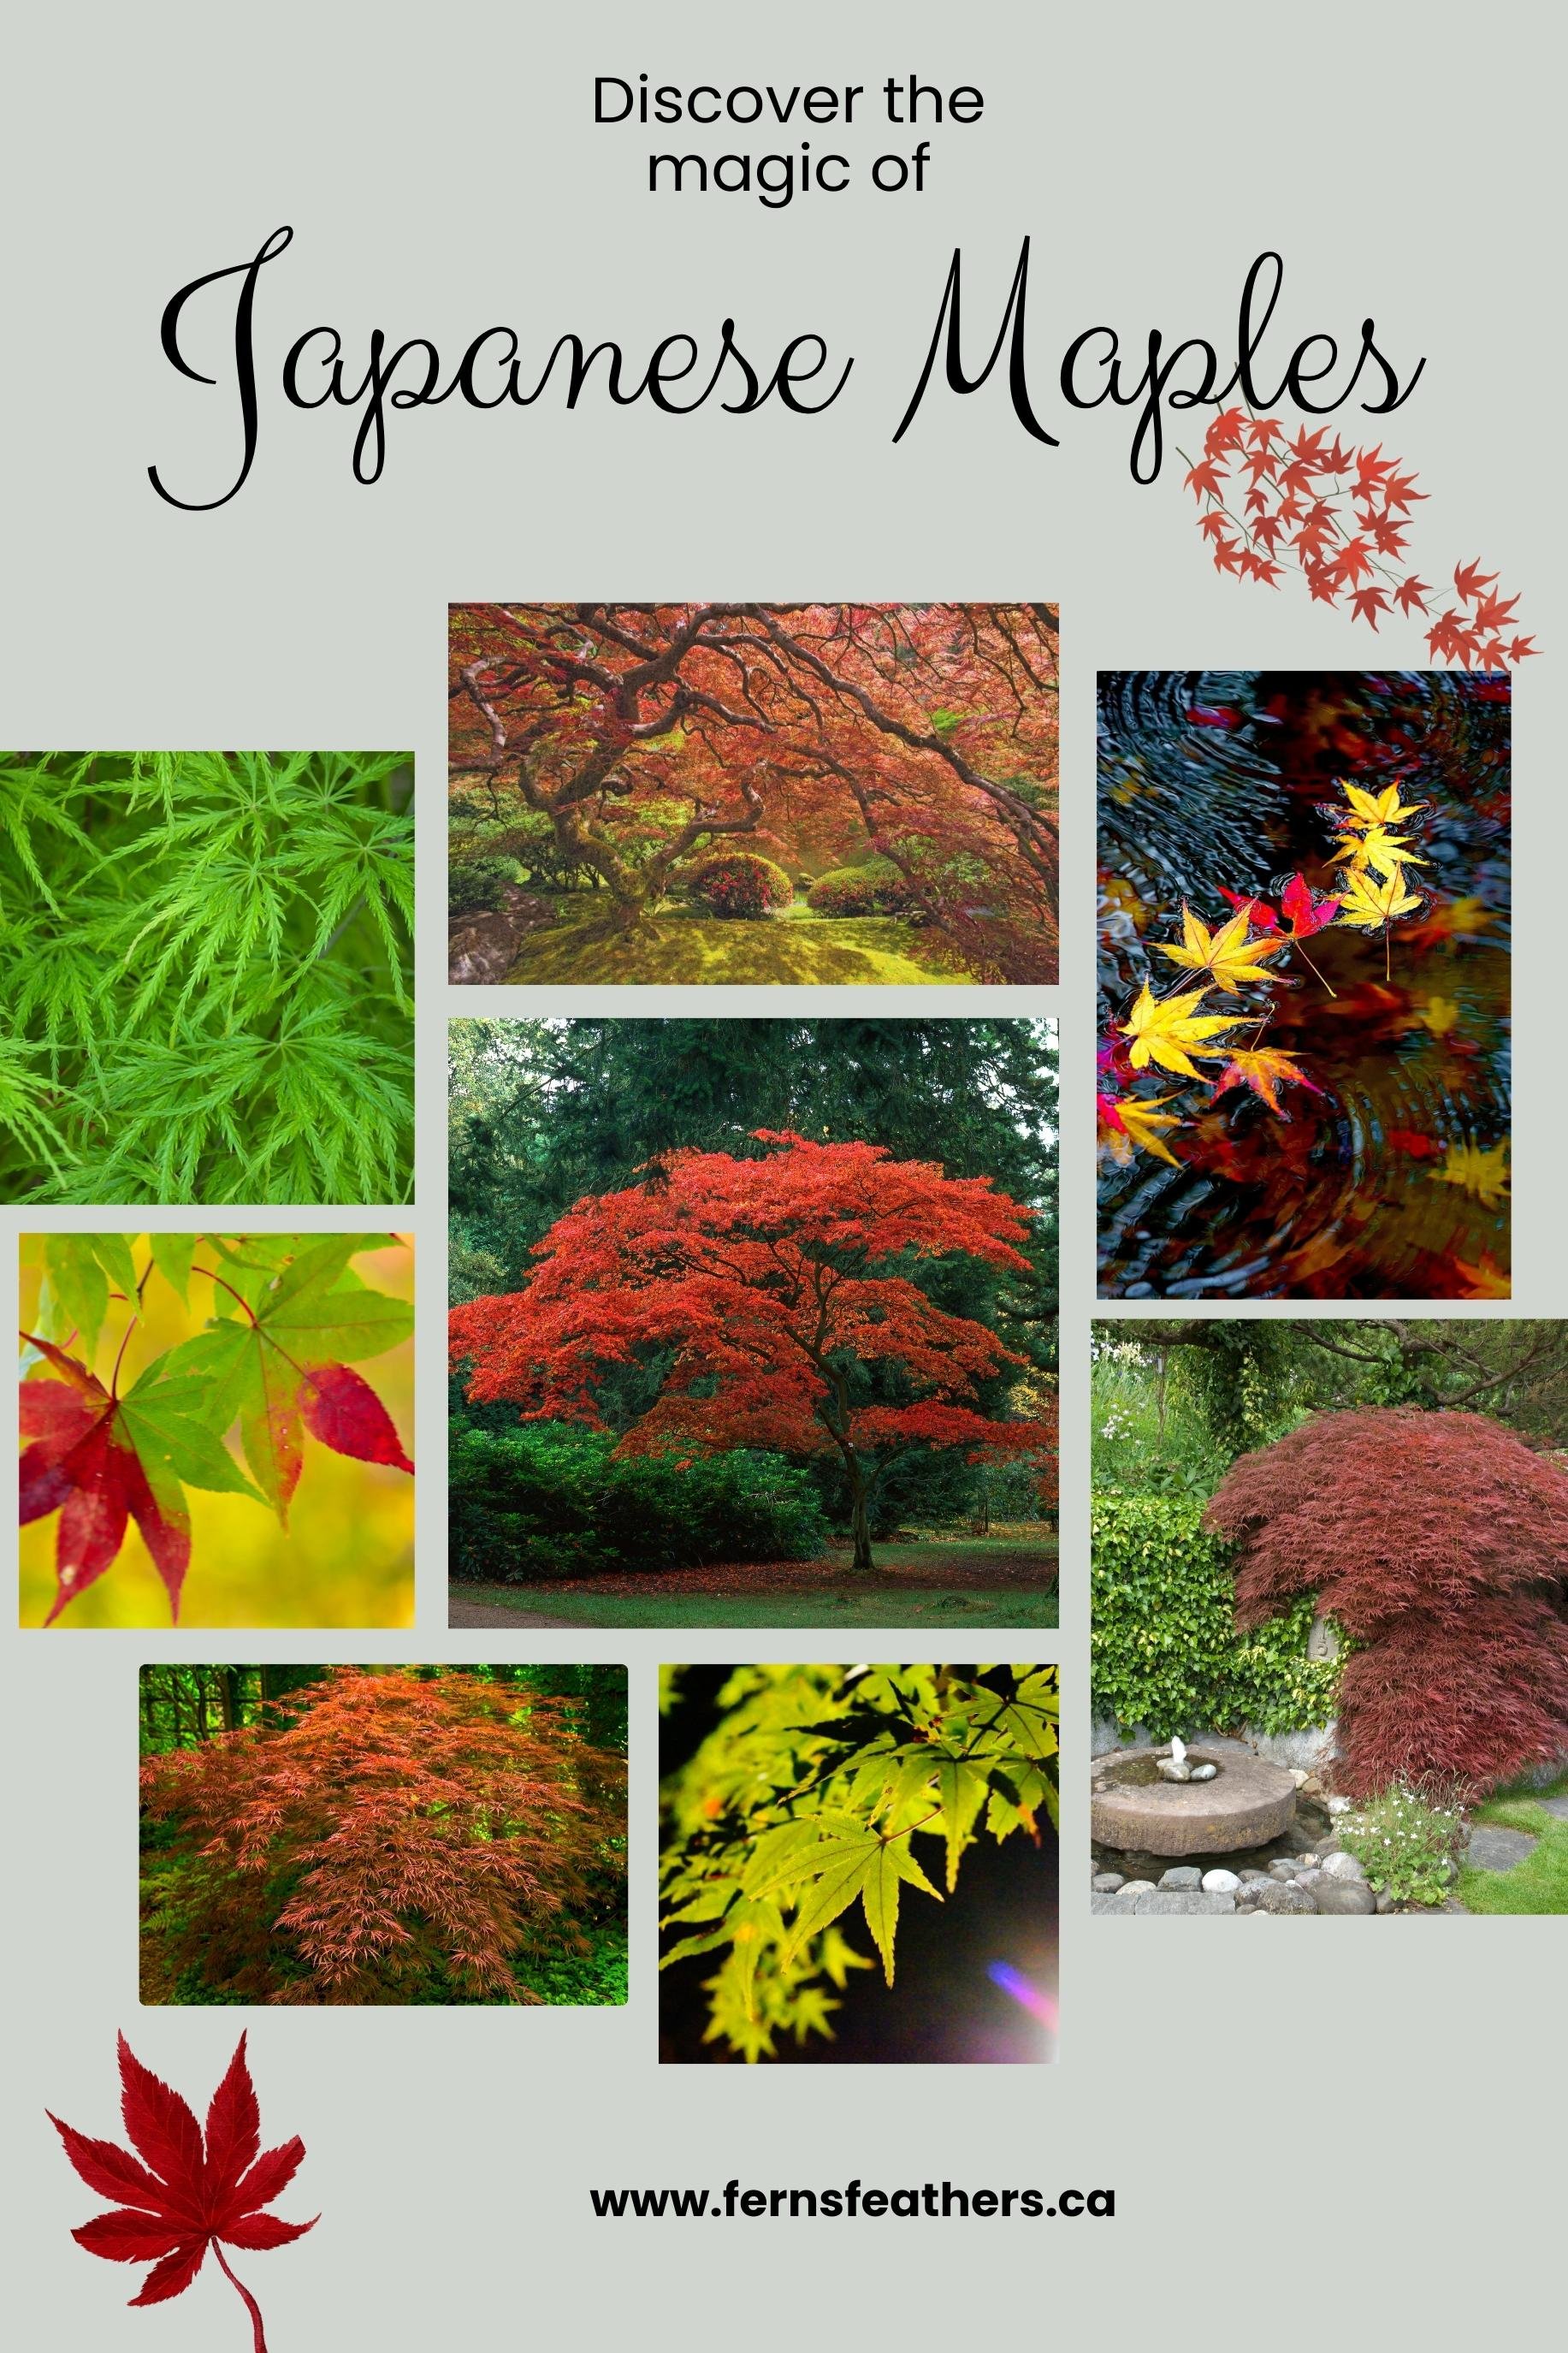 Graphic showing the beauty of Japanese Maples in the landscape including several weeping varieties.